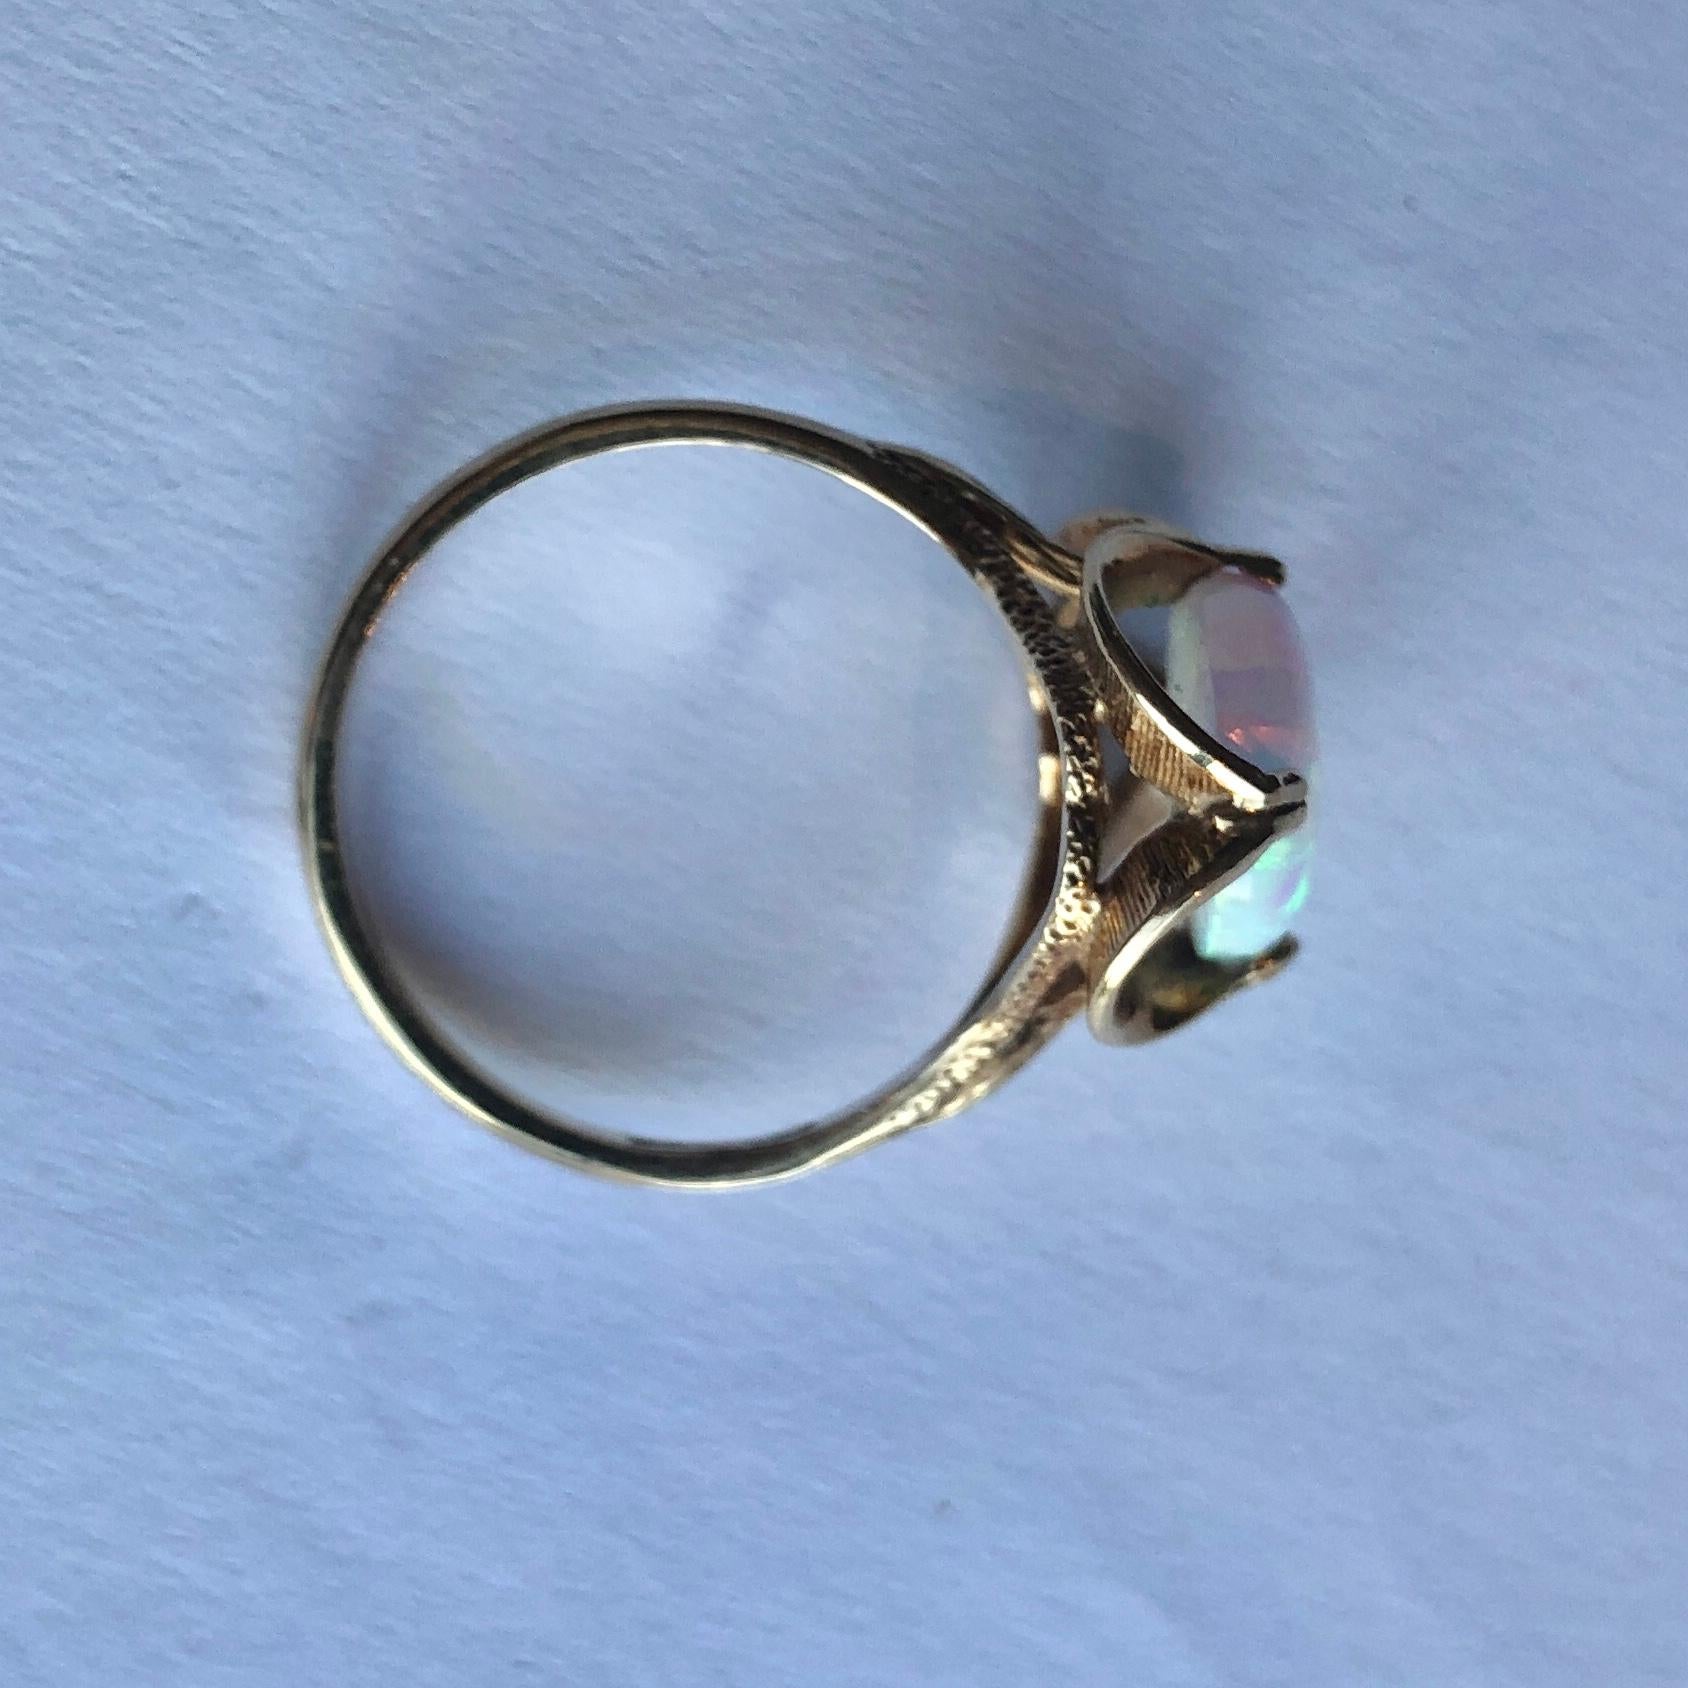 Sat simply in a gorgeous scalloped setting is a gorgeous and colourful opal. The ring is modelled in 9carat gold and has fine engraved detail on the gallery and the shoulders. The opal measures approx 4ct. 

Ring Size: R 1/2 or 9 
Stone Dimensions: